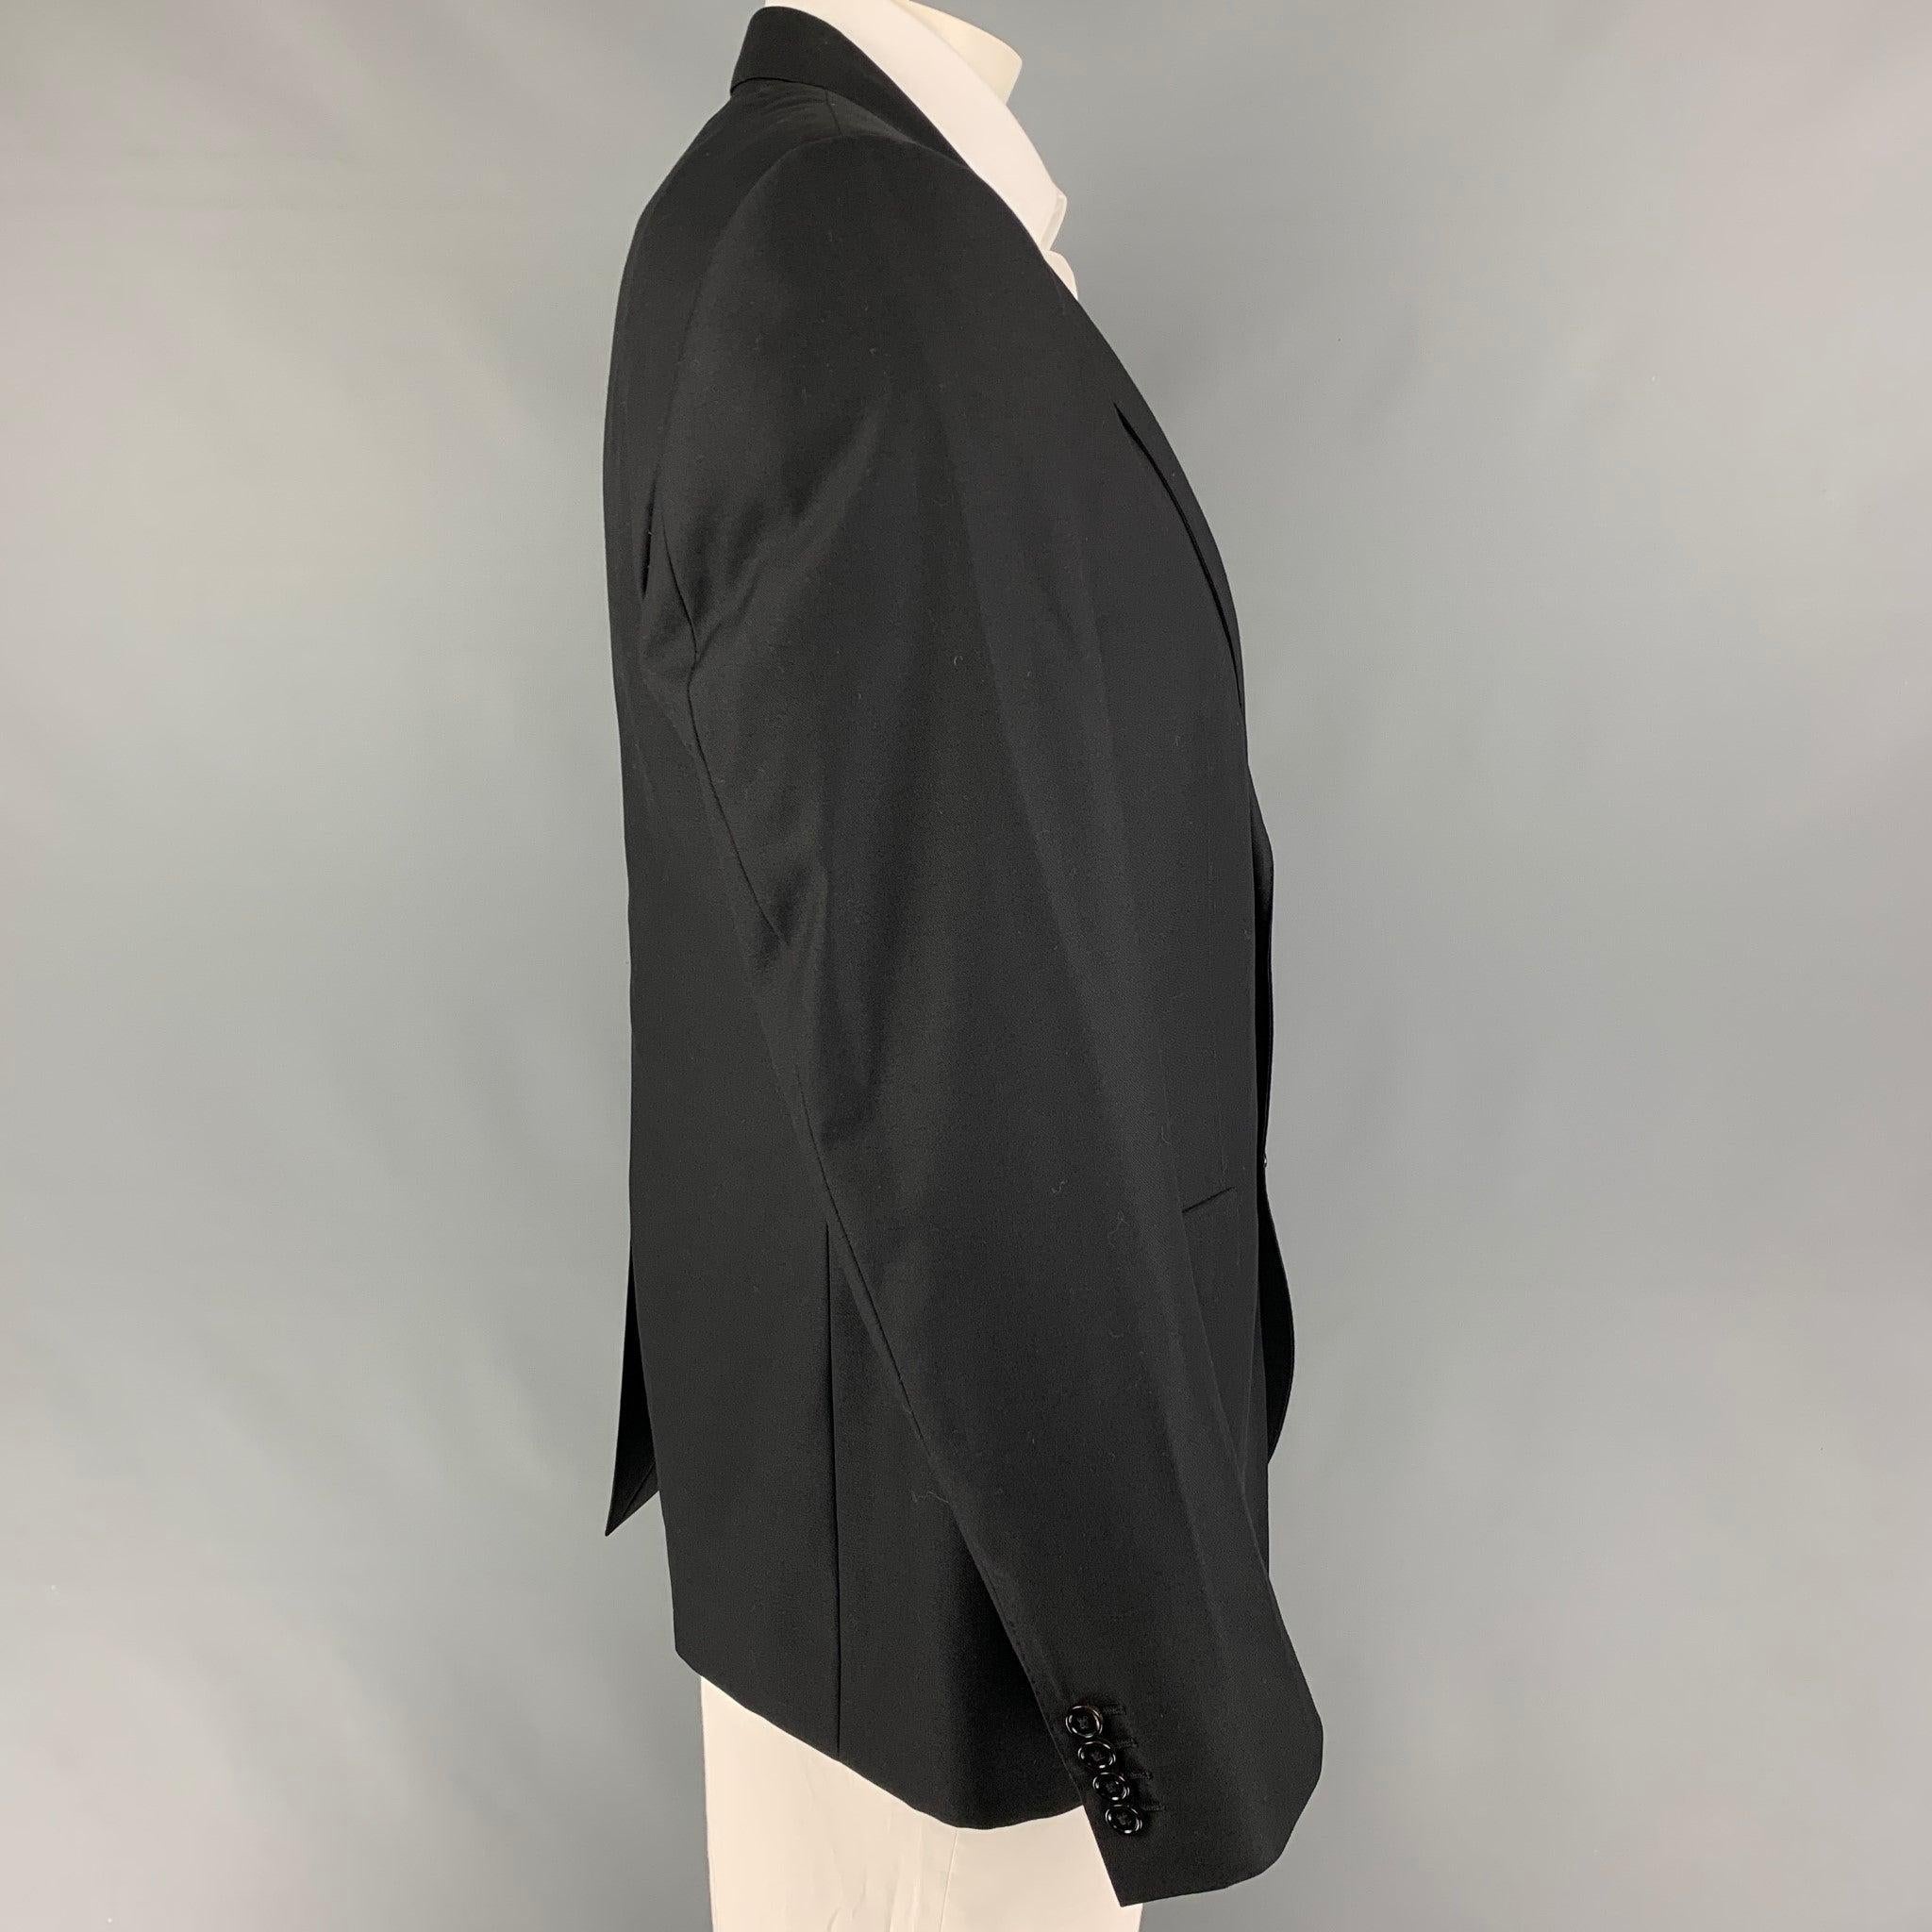 DOLCE & GABBANA sport coat comes in a black wool blend with a full liner featuring a peak lapel, flap pockets, single back vent, and a double button closure. Made in Italy.New with tags.
 

Marked:   54 

Measurements: 
 
Shoulder: 18.5 inches 